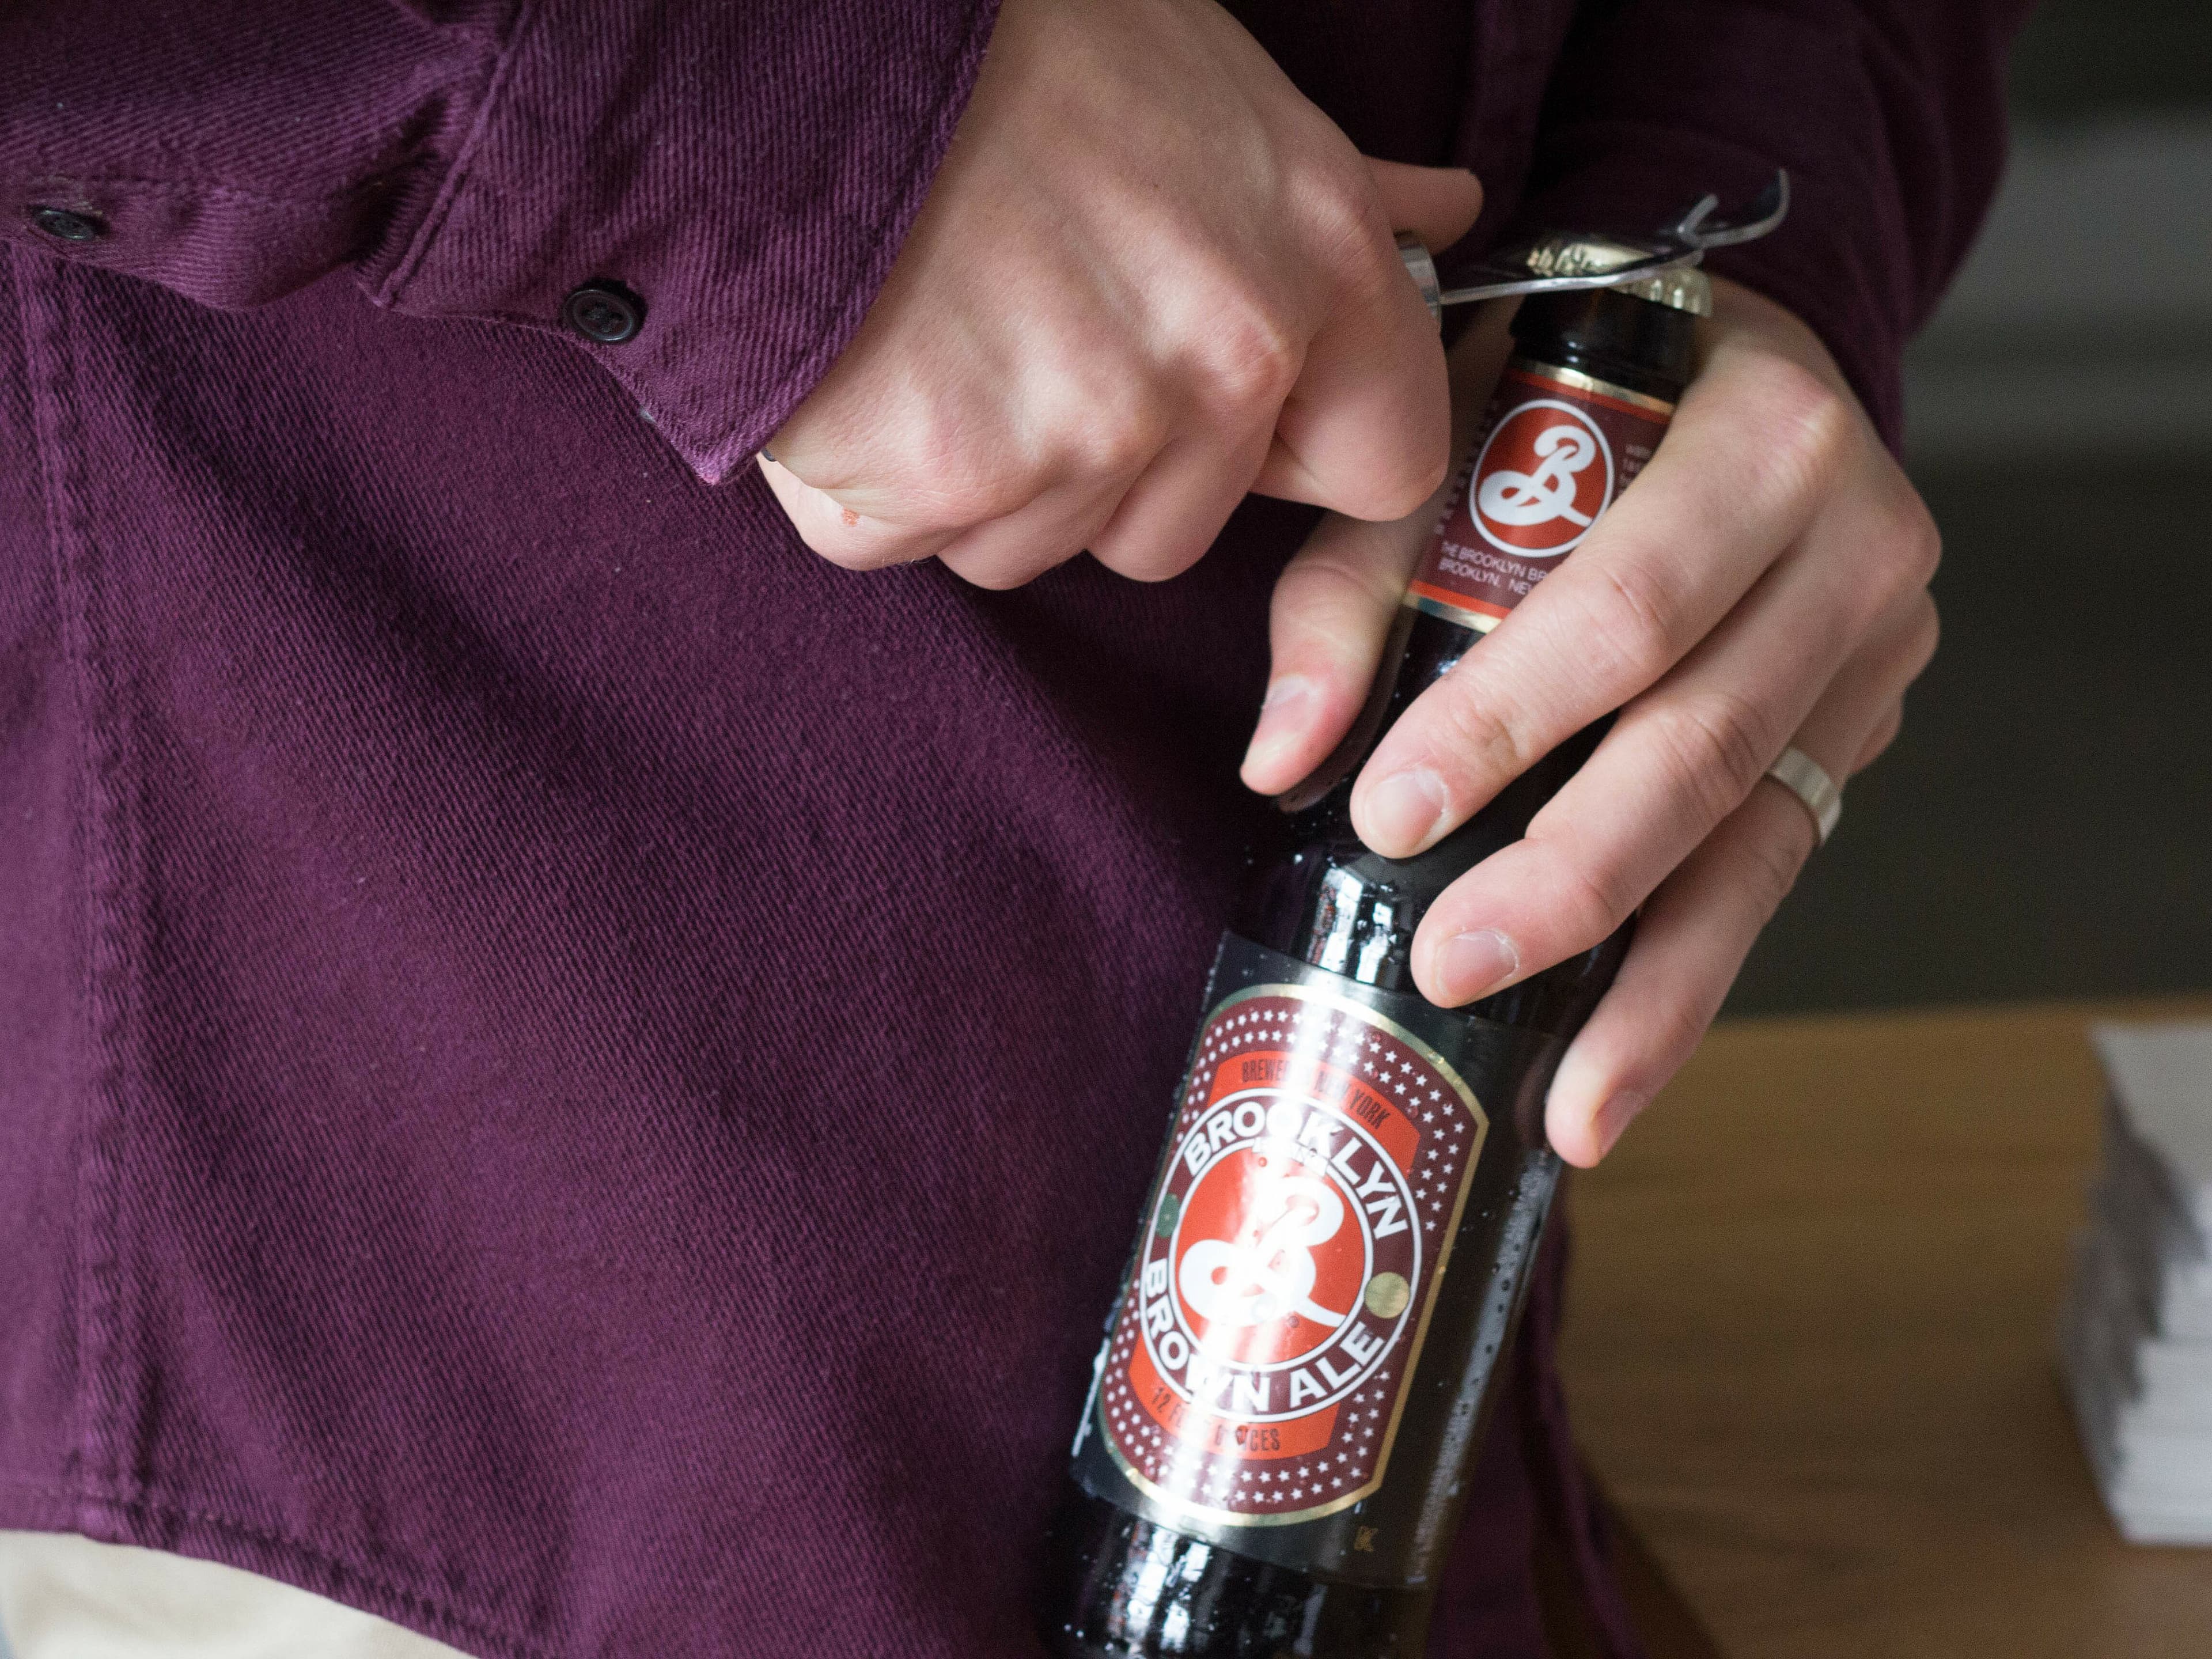 A person wearing a maroon shirt is opening a Brooklyn Brewery brand beer bottle with a metal bottle opener. The person is holding the bottle cap and the opener with one hand and the bottle with the other. The bottle label is clearly visible.